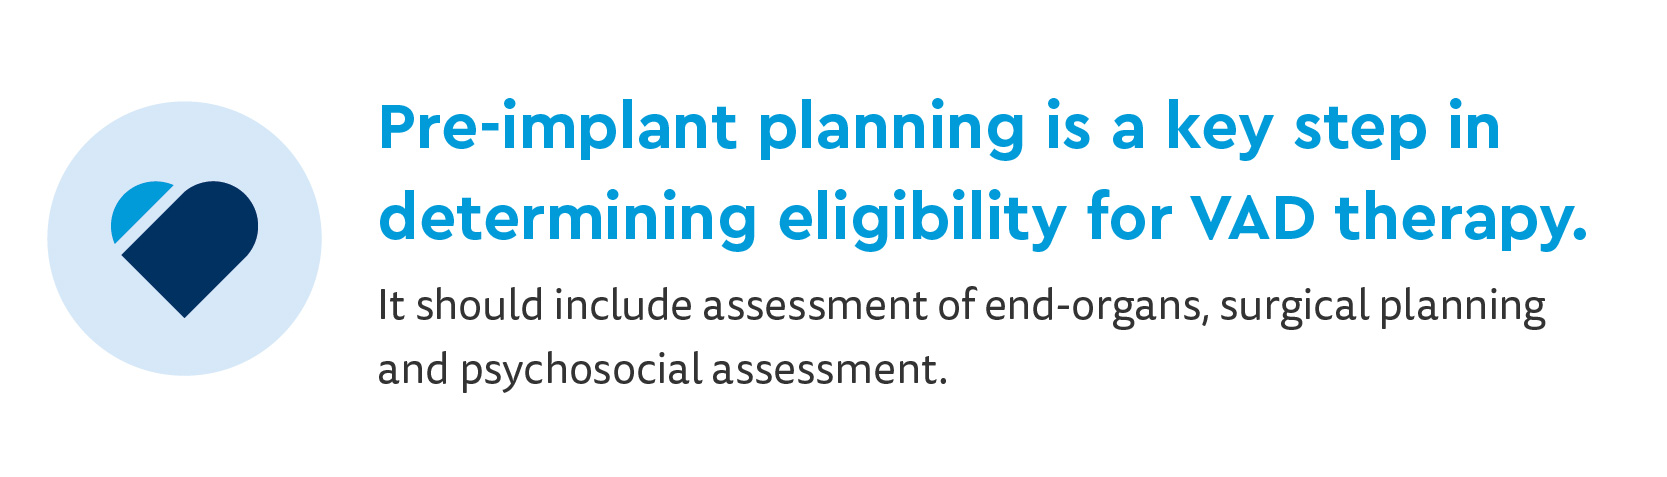 Infographic: Pre-implant planning is a key step in determining eligibility for VAD therapy. It should include assessment of end-organs, surgical planning and psychosocial assessment.